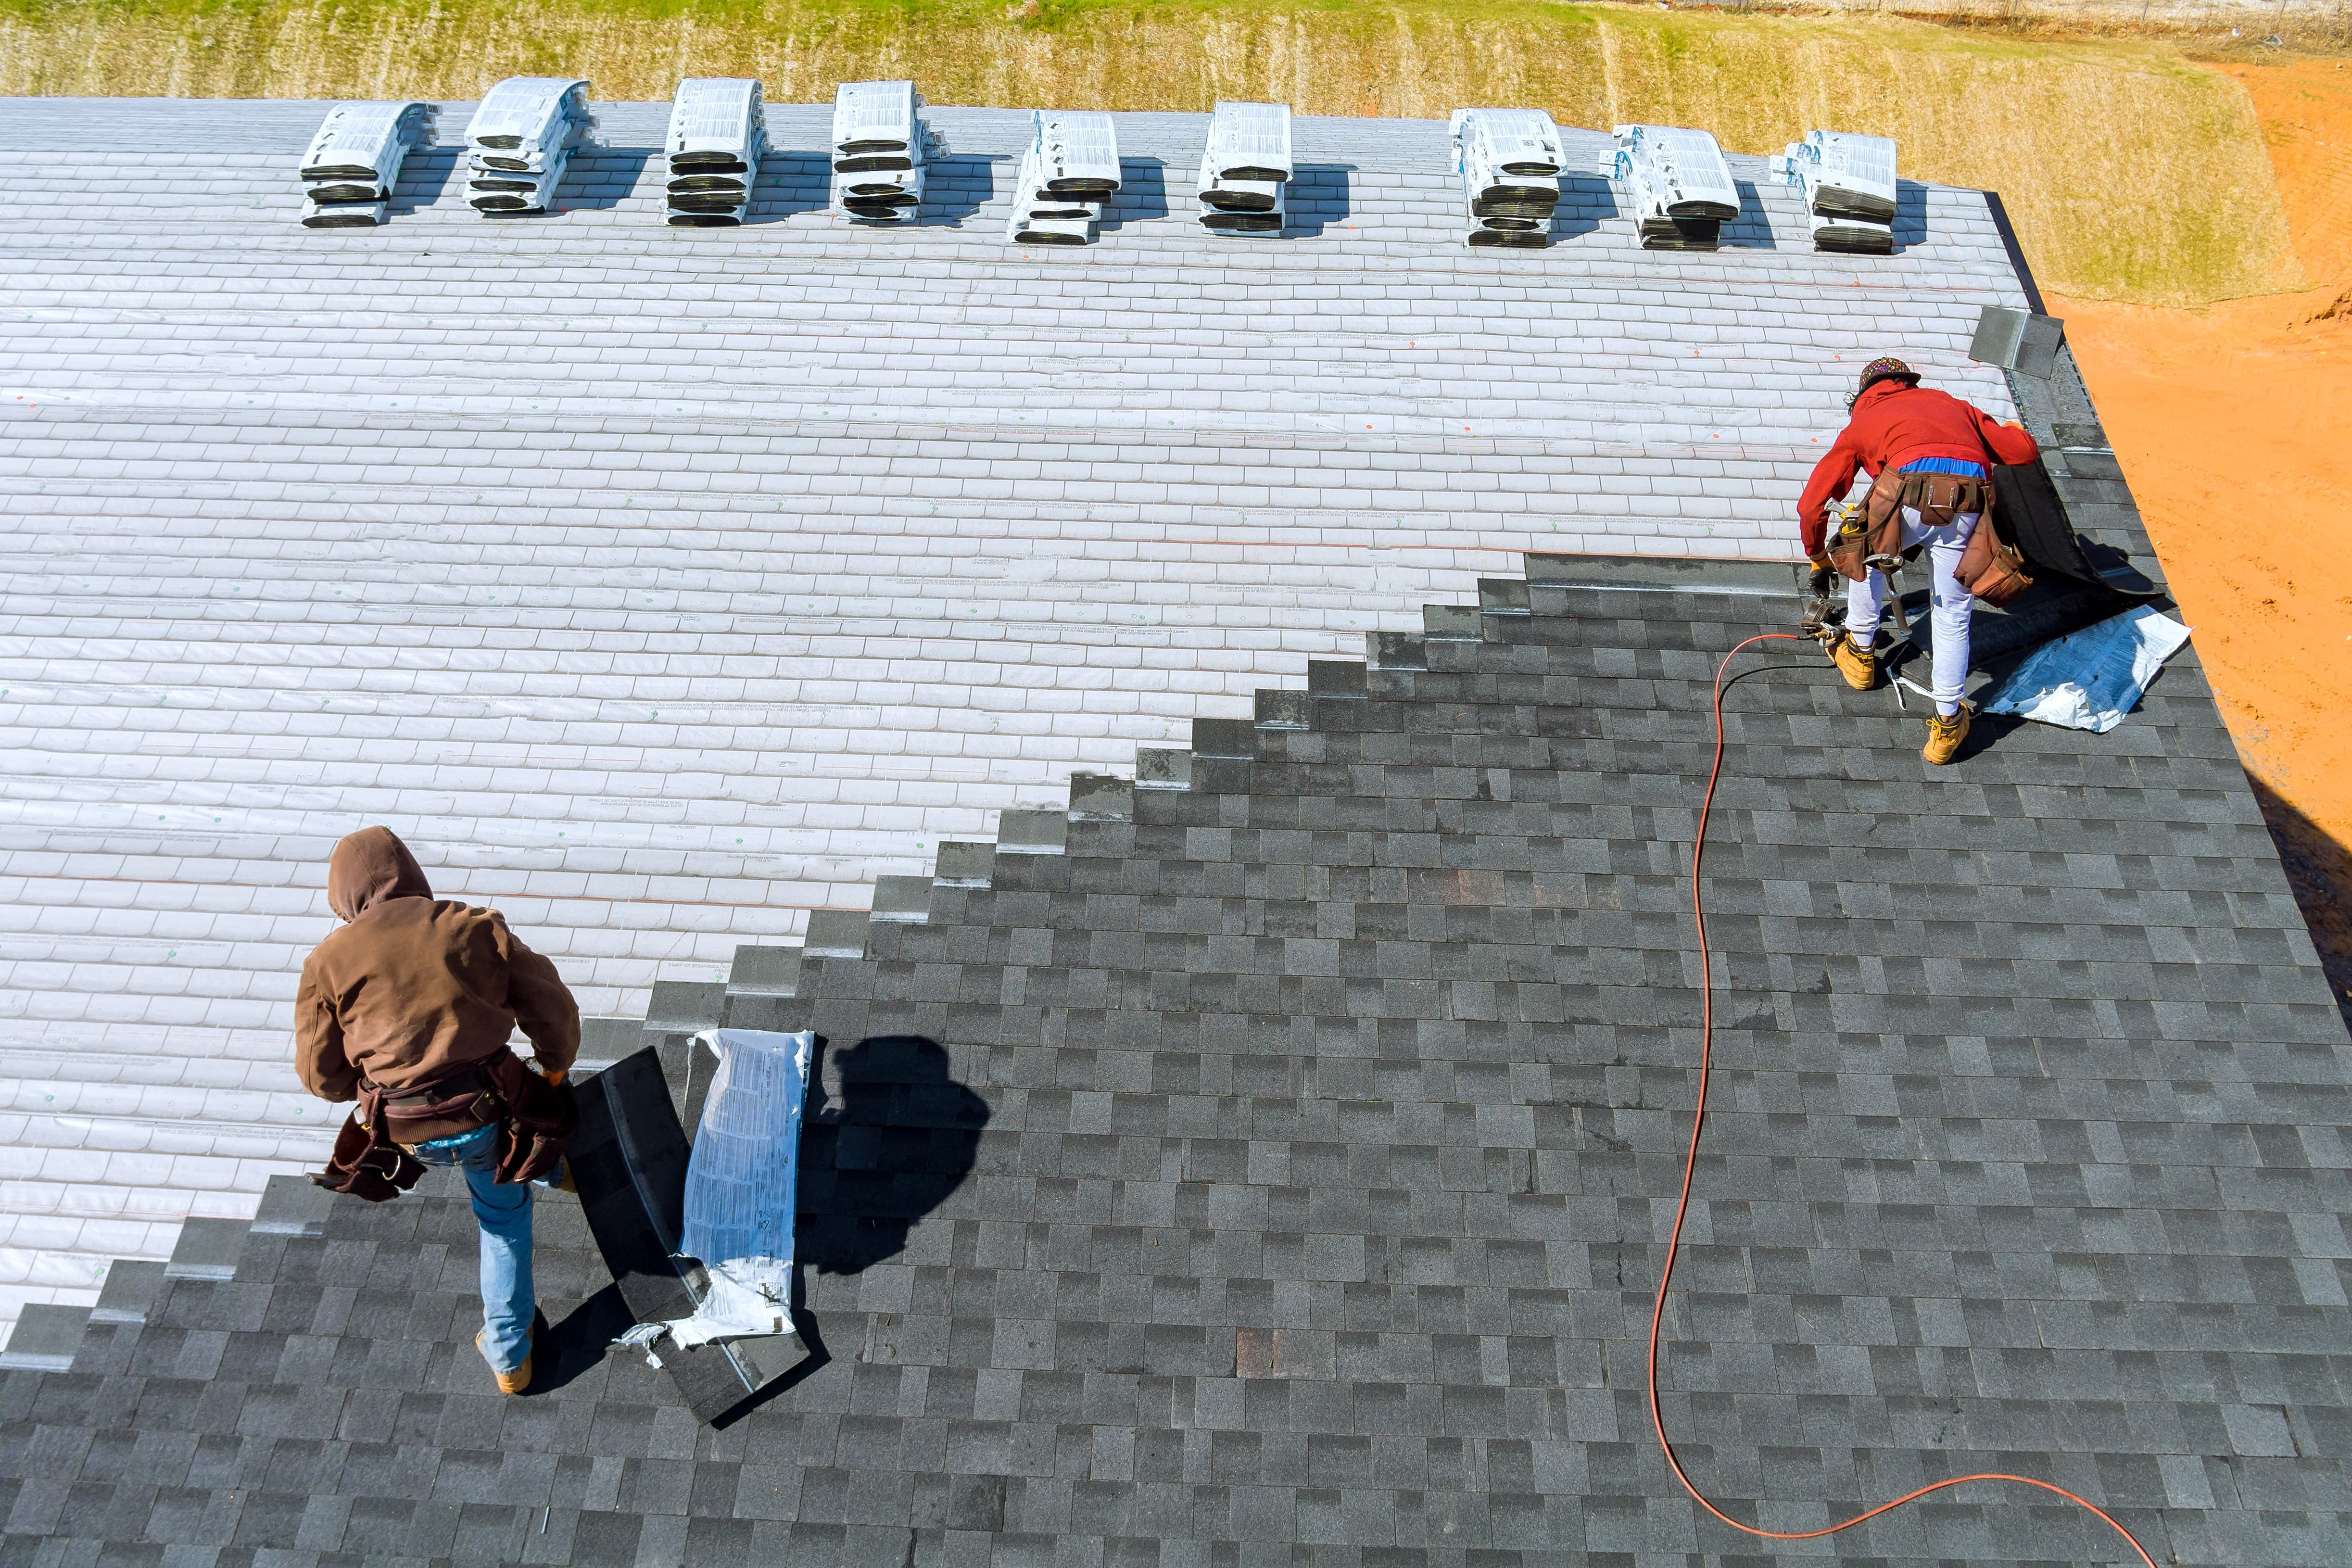 Two professional roofers are seen installing a roof on a house, with one roofer securing shingles and the other managing roofing materials during the roof installation process.